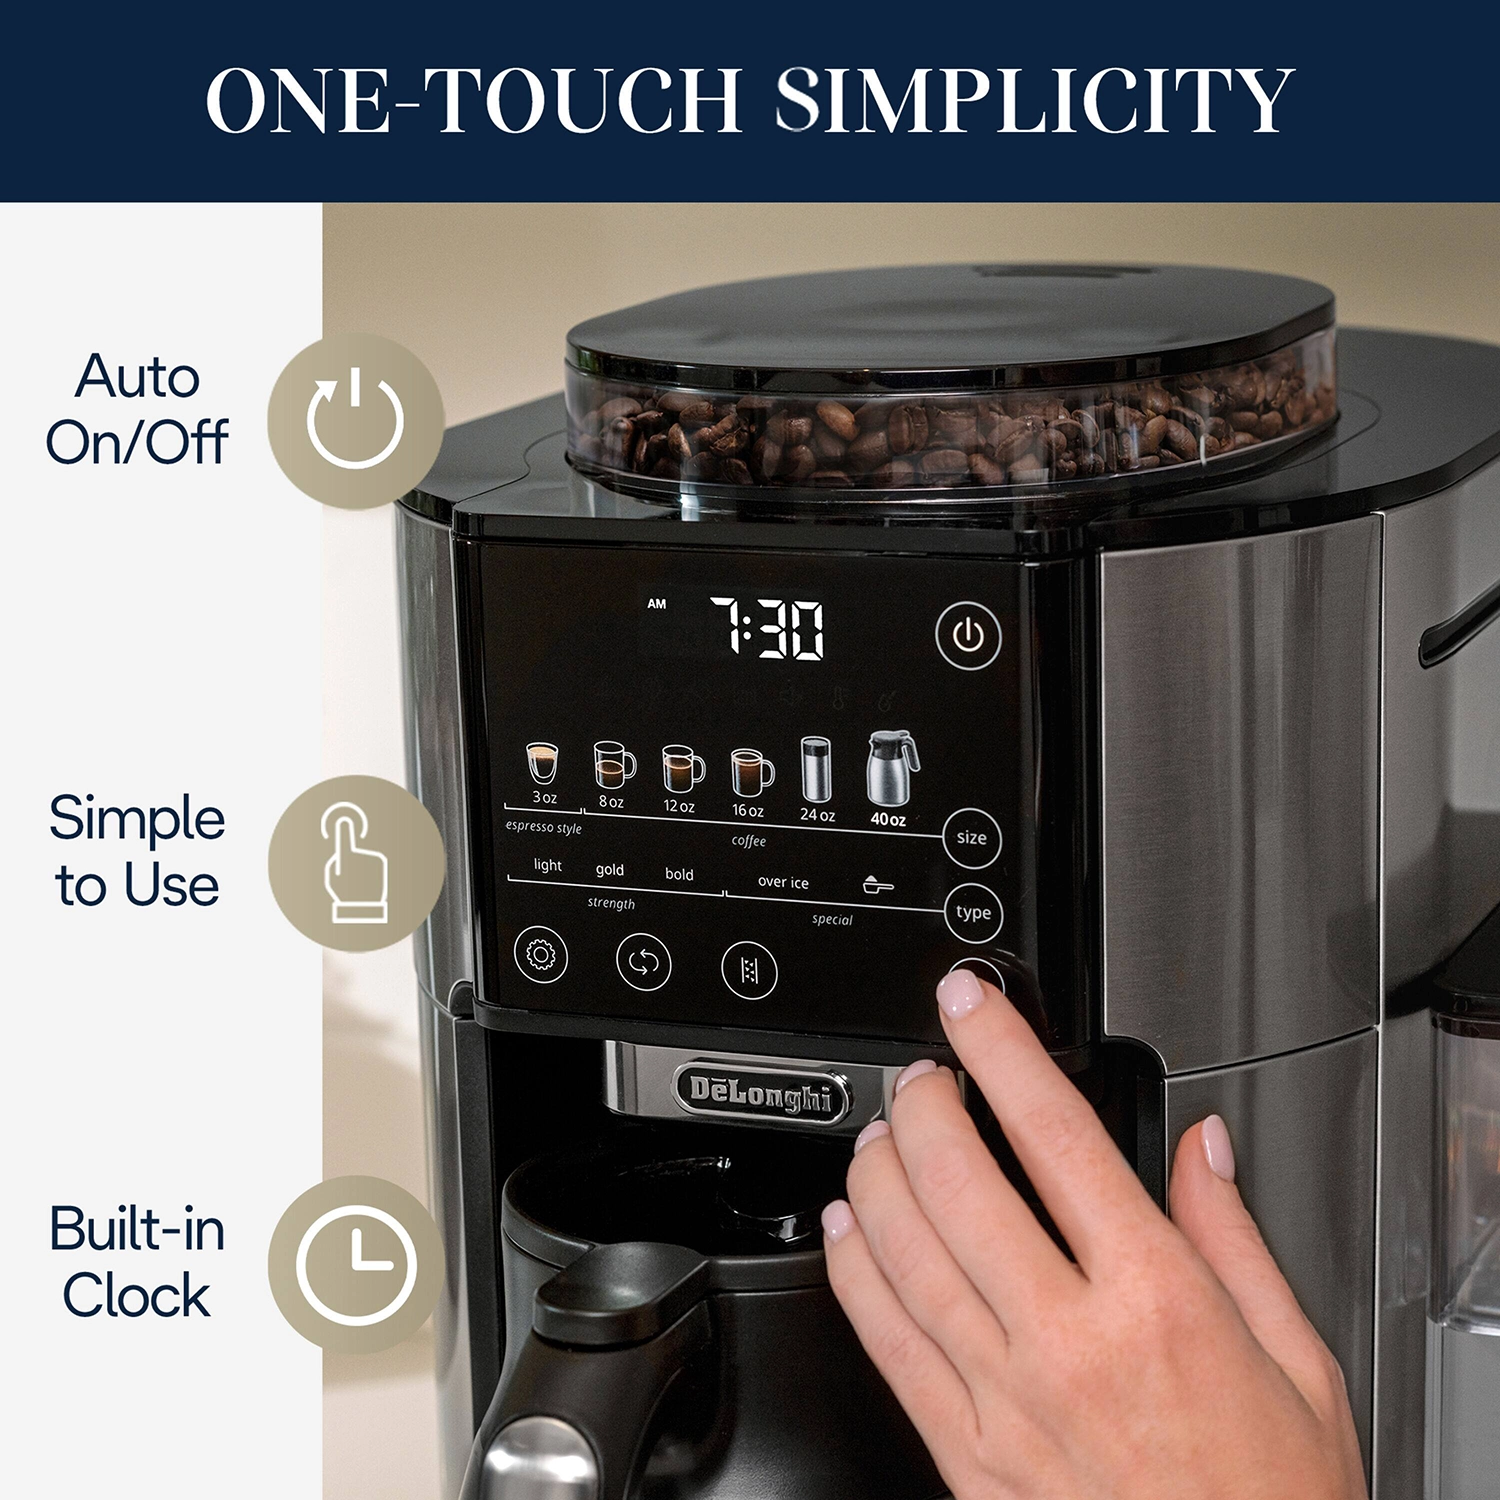 https://www.homethreads.com/files/delonghi/cam51035m-delonghi-truebrew-automatic-coffee-maker-with-bean-extract-technology-7.webp